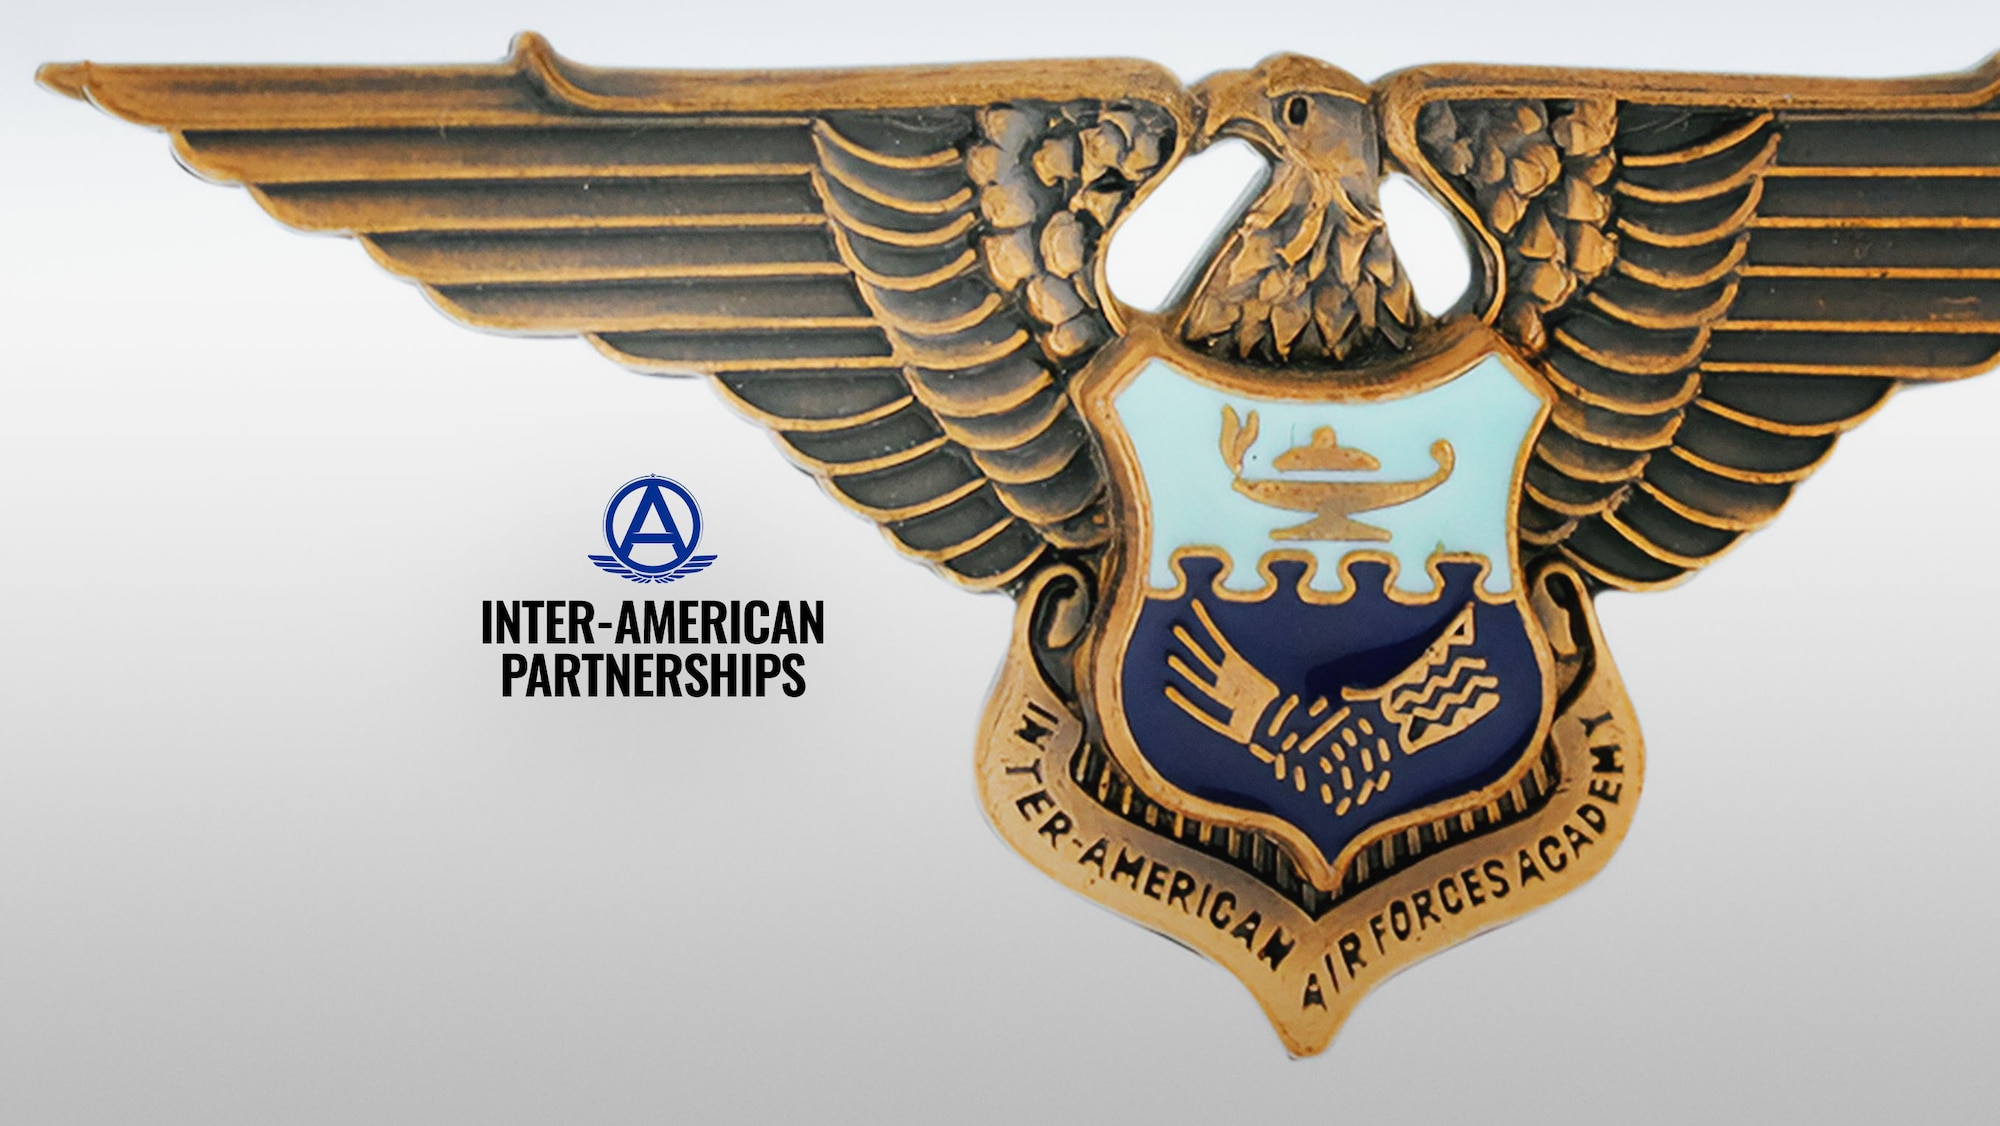 The Inter-American Air Forces Academy’s mission, Lackland AFB, San Antonio, Texas, is to provide military education and training to military personnel of eligible partner nations. To accomplish this, IAAFA partners with 23 countries to teach 32 curricula to include Professional Military Education, aircrew training and technical training.